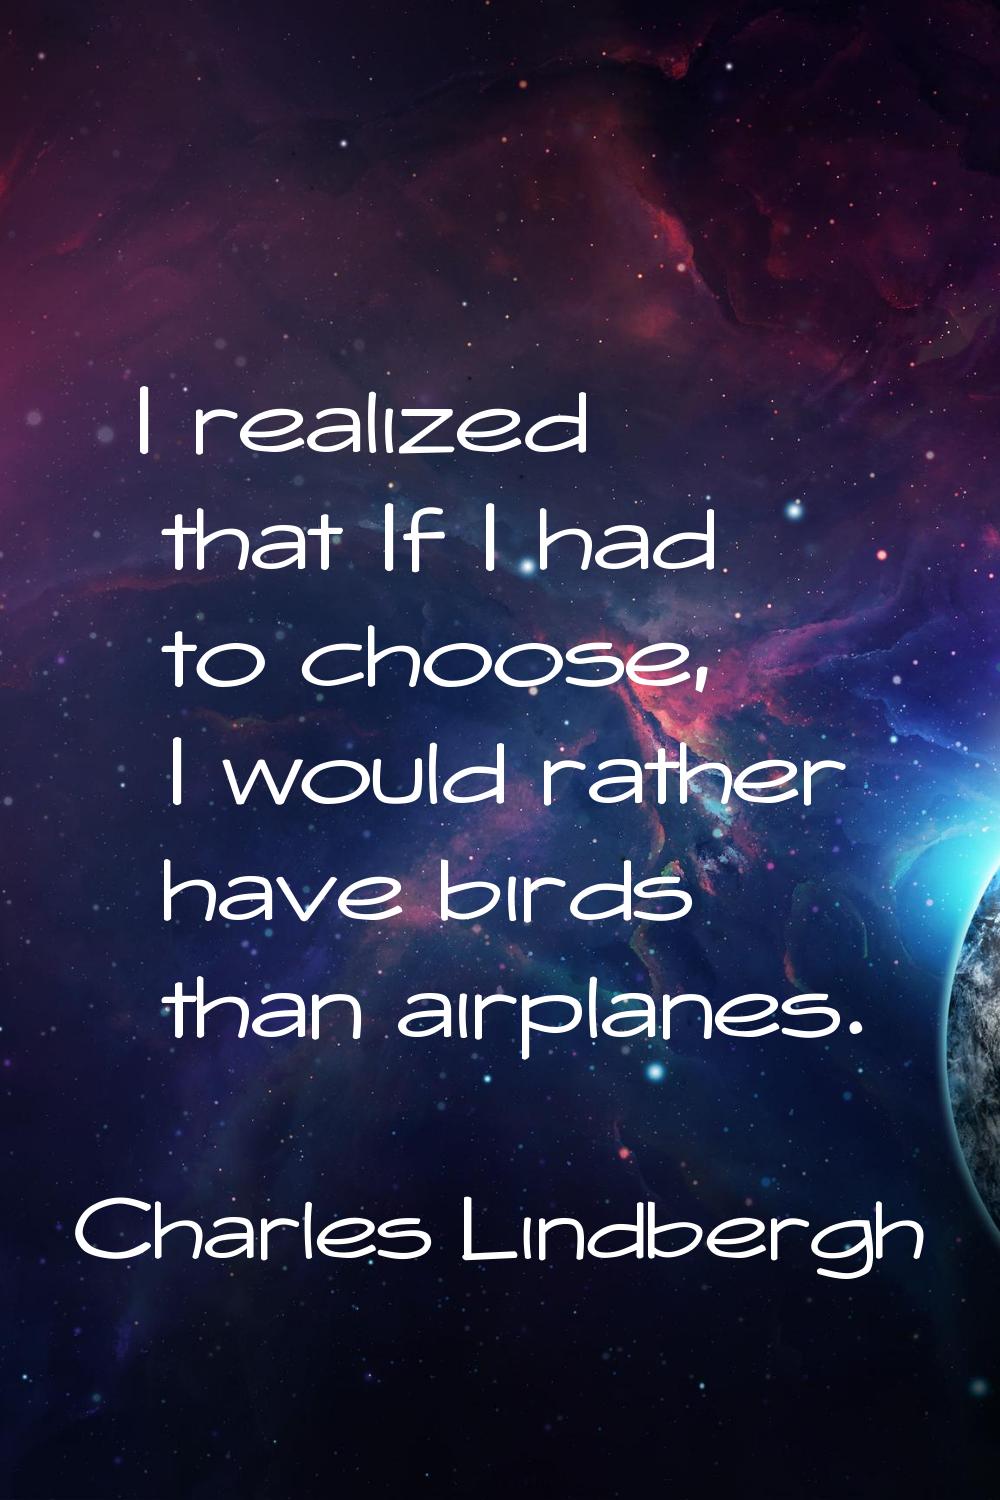 I realized that If I had to choose, I would rather have birds than airplanes.